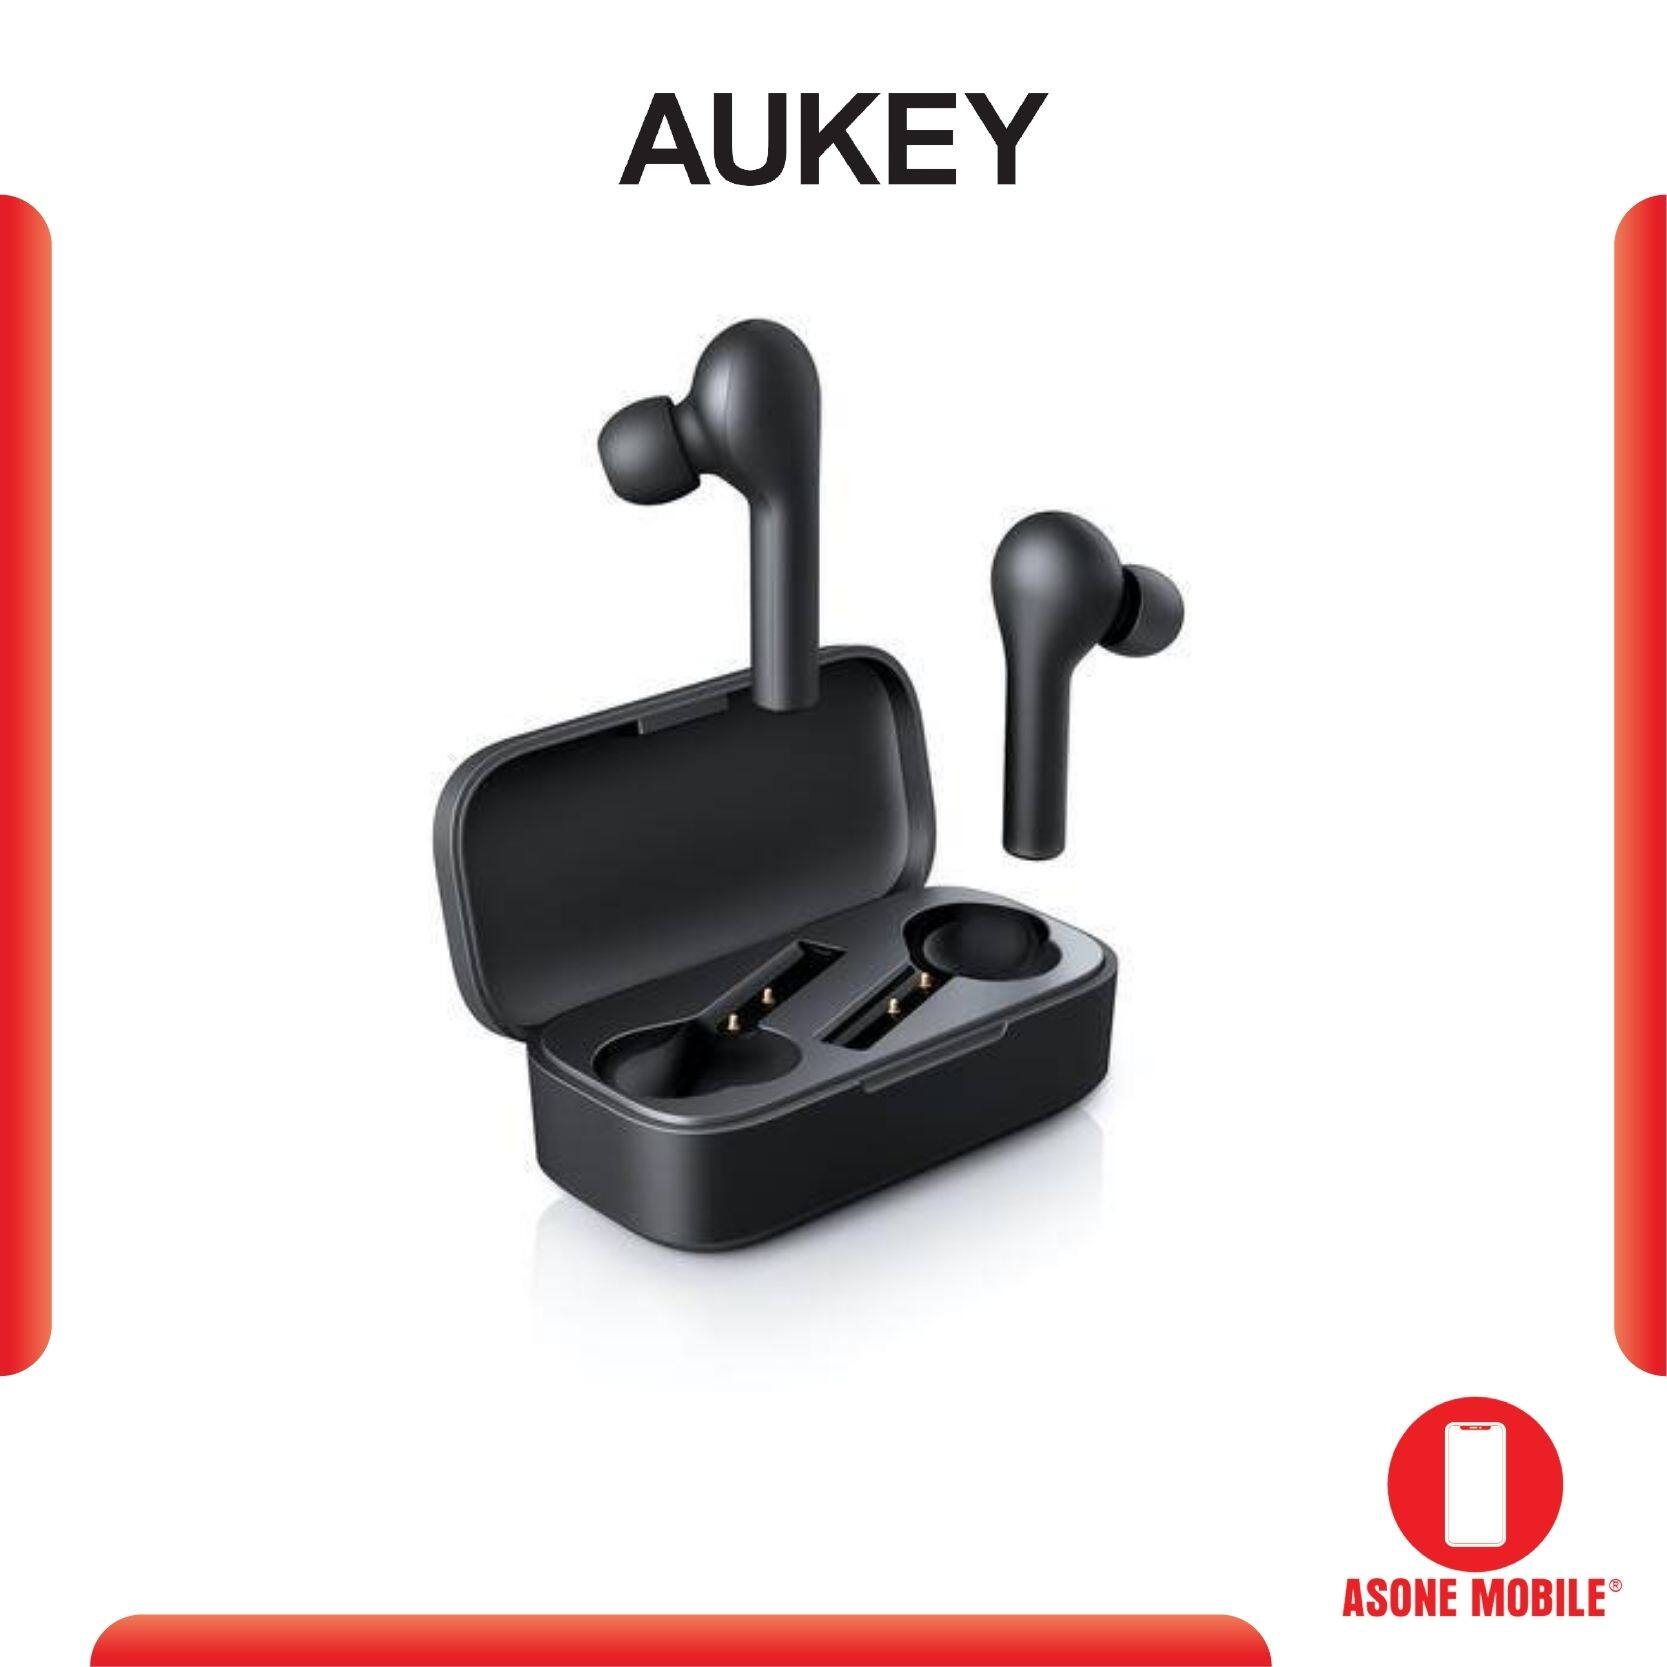 Original Aukey EP-T21 BT 5.0 IPX4 TWS True Wireless Earbuds With Noise Cancellation Mic